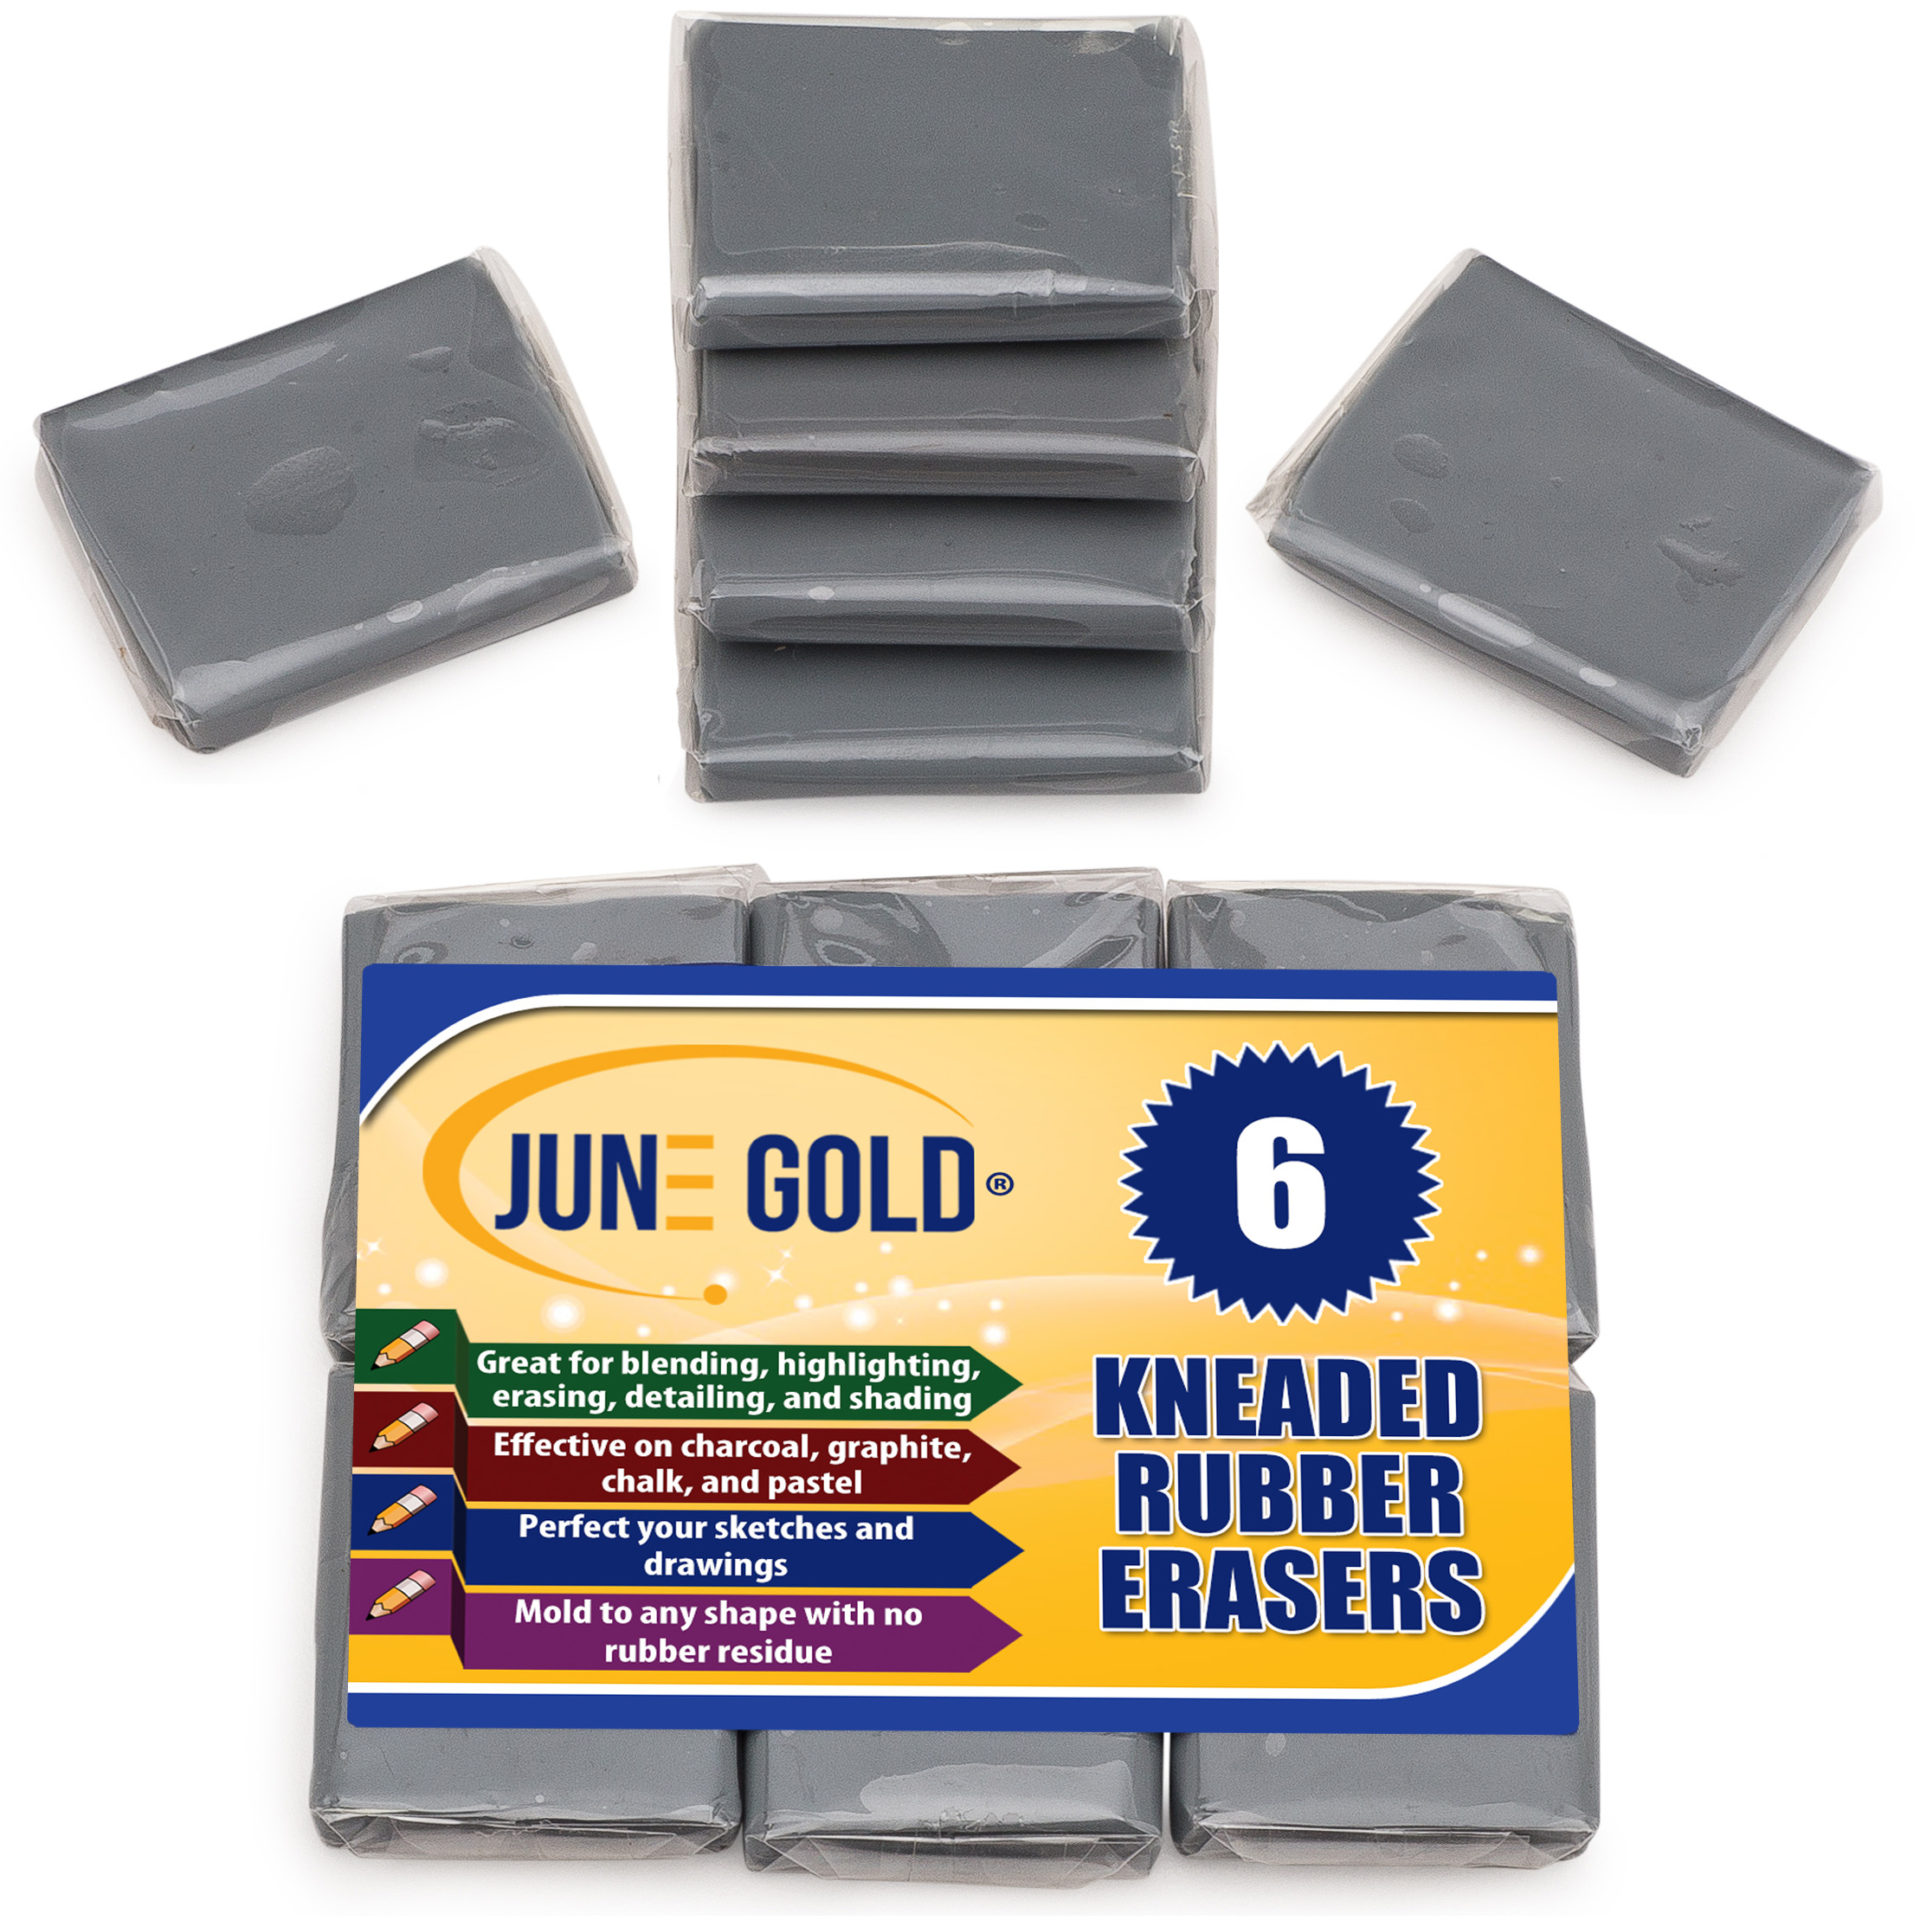 Kneaded Rubber Erasers – June Gold